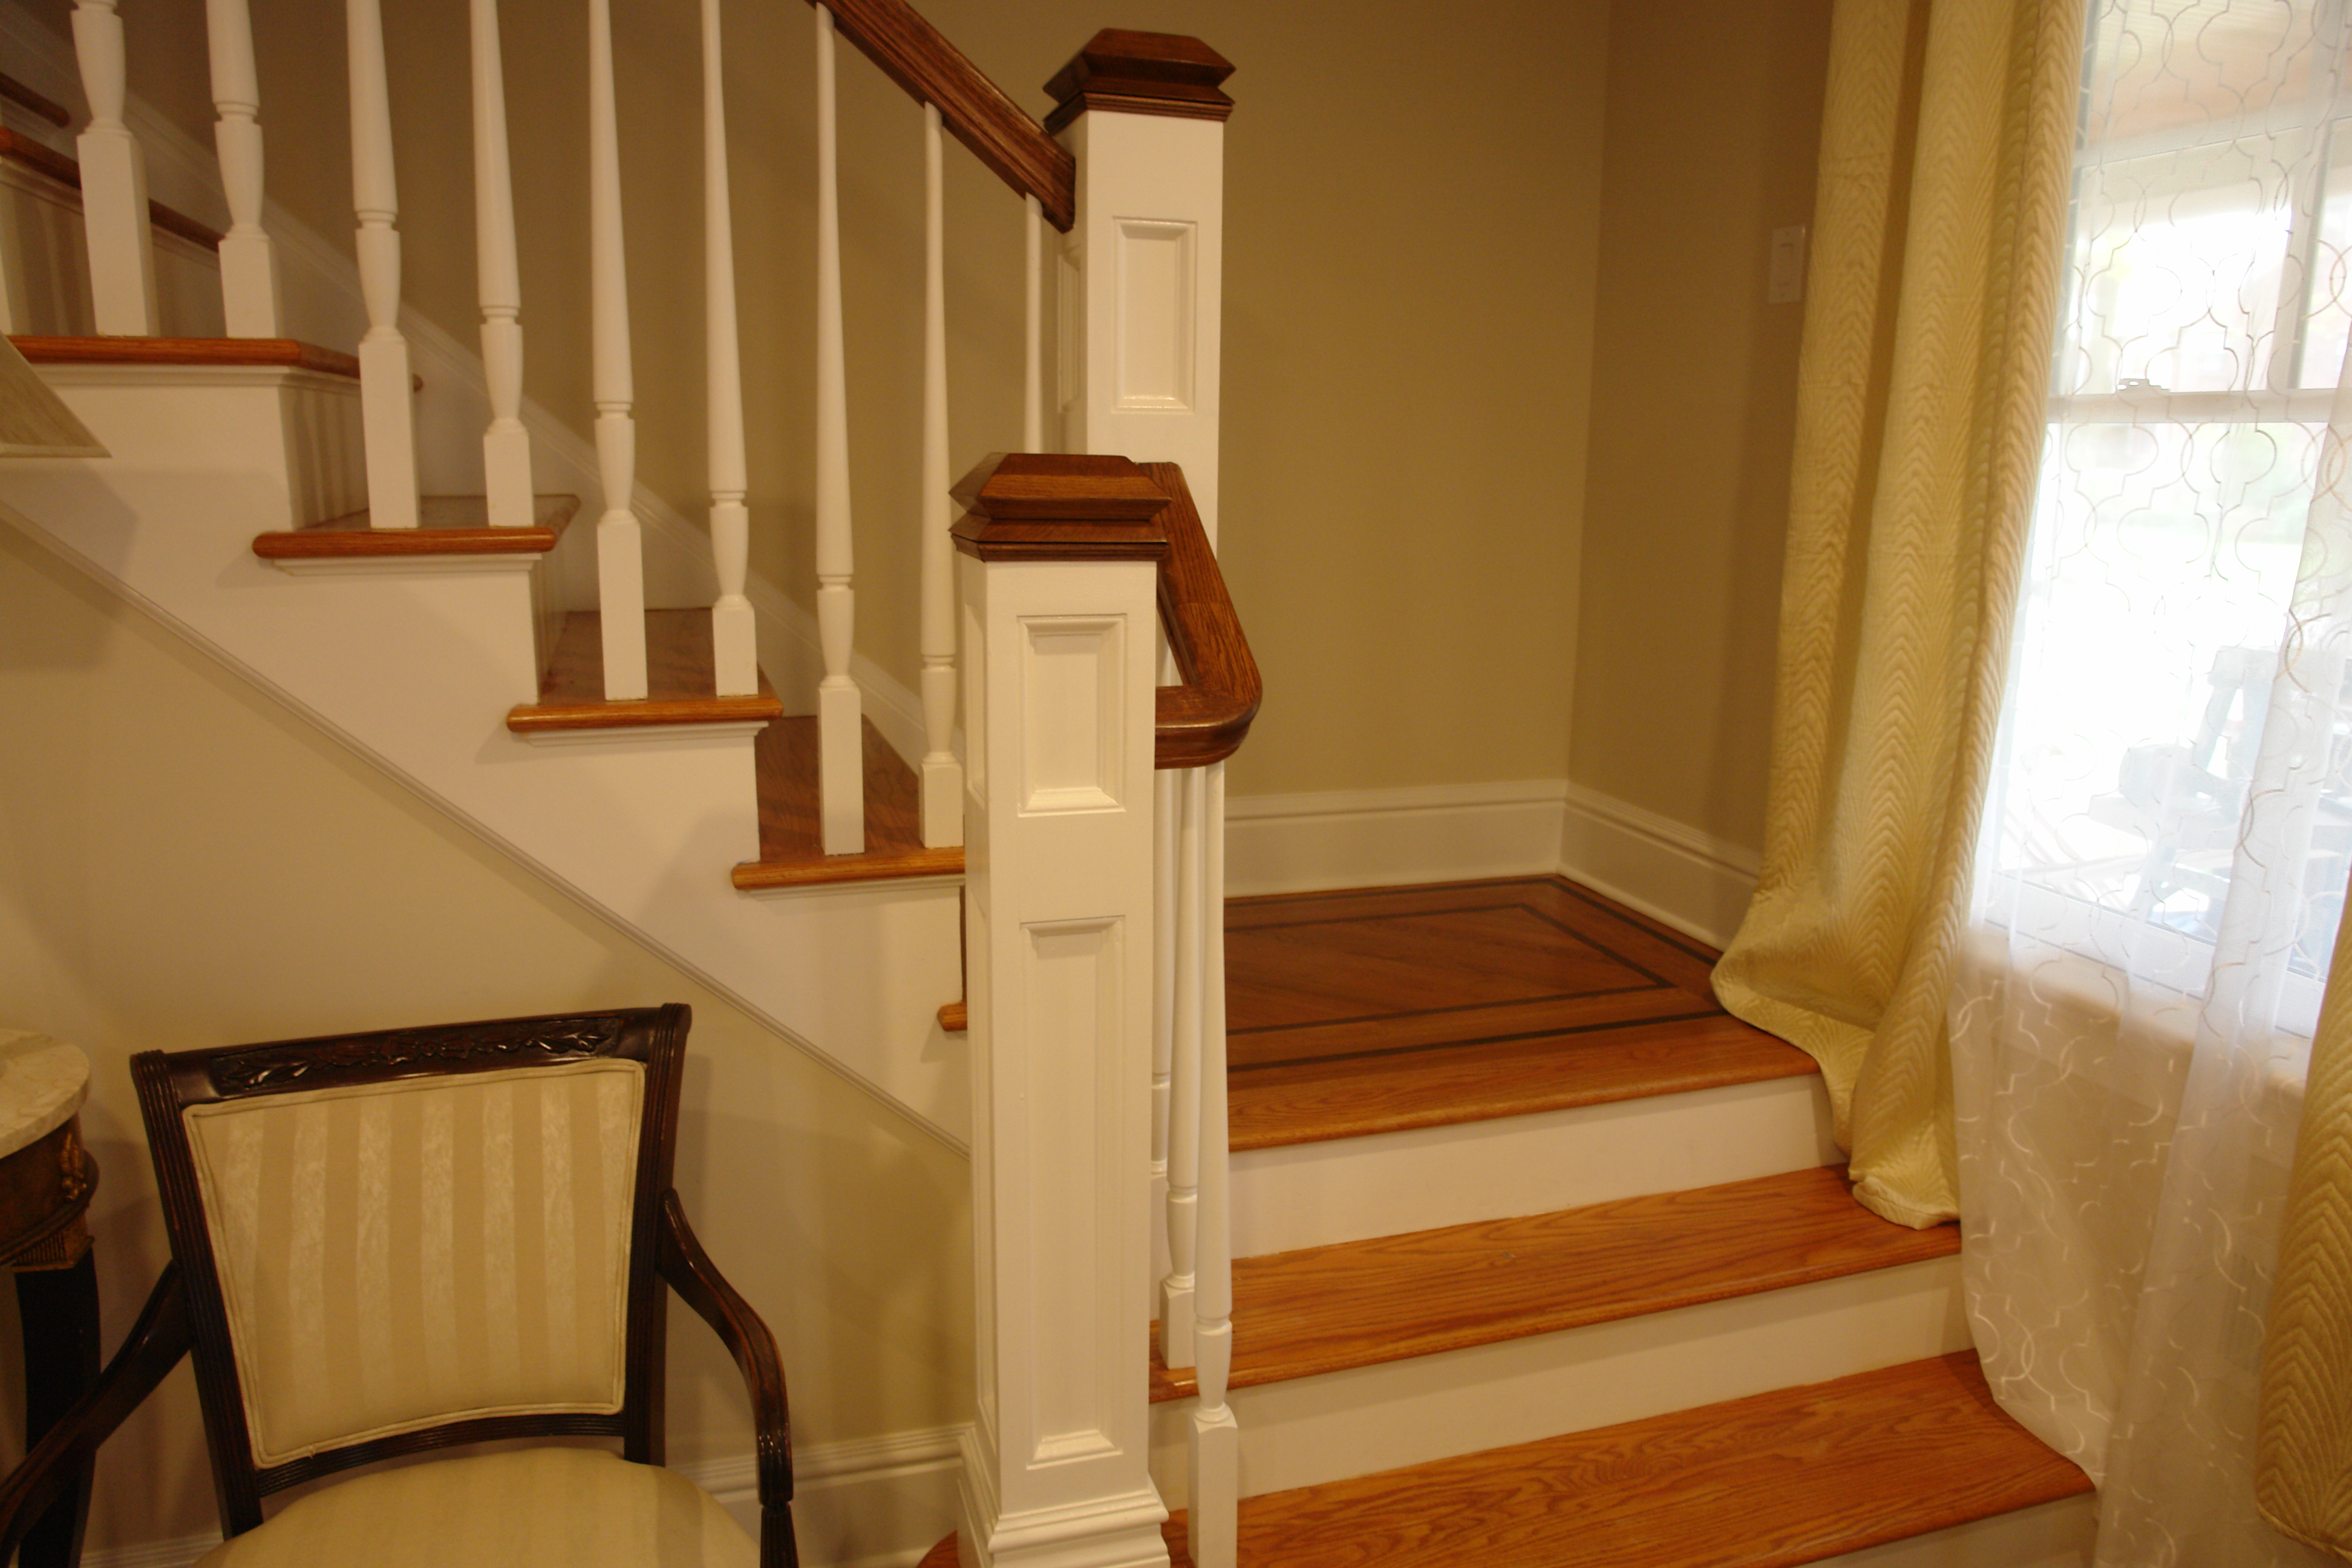 Wooden staircase and hand rails